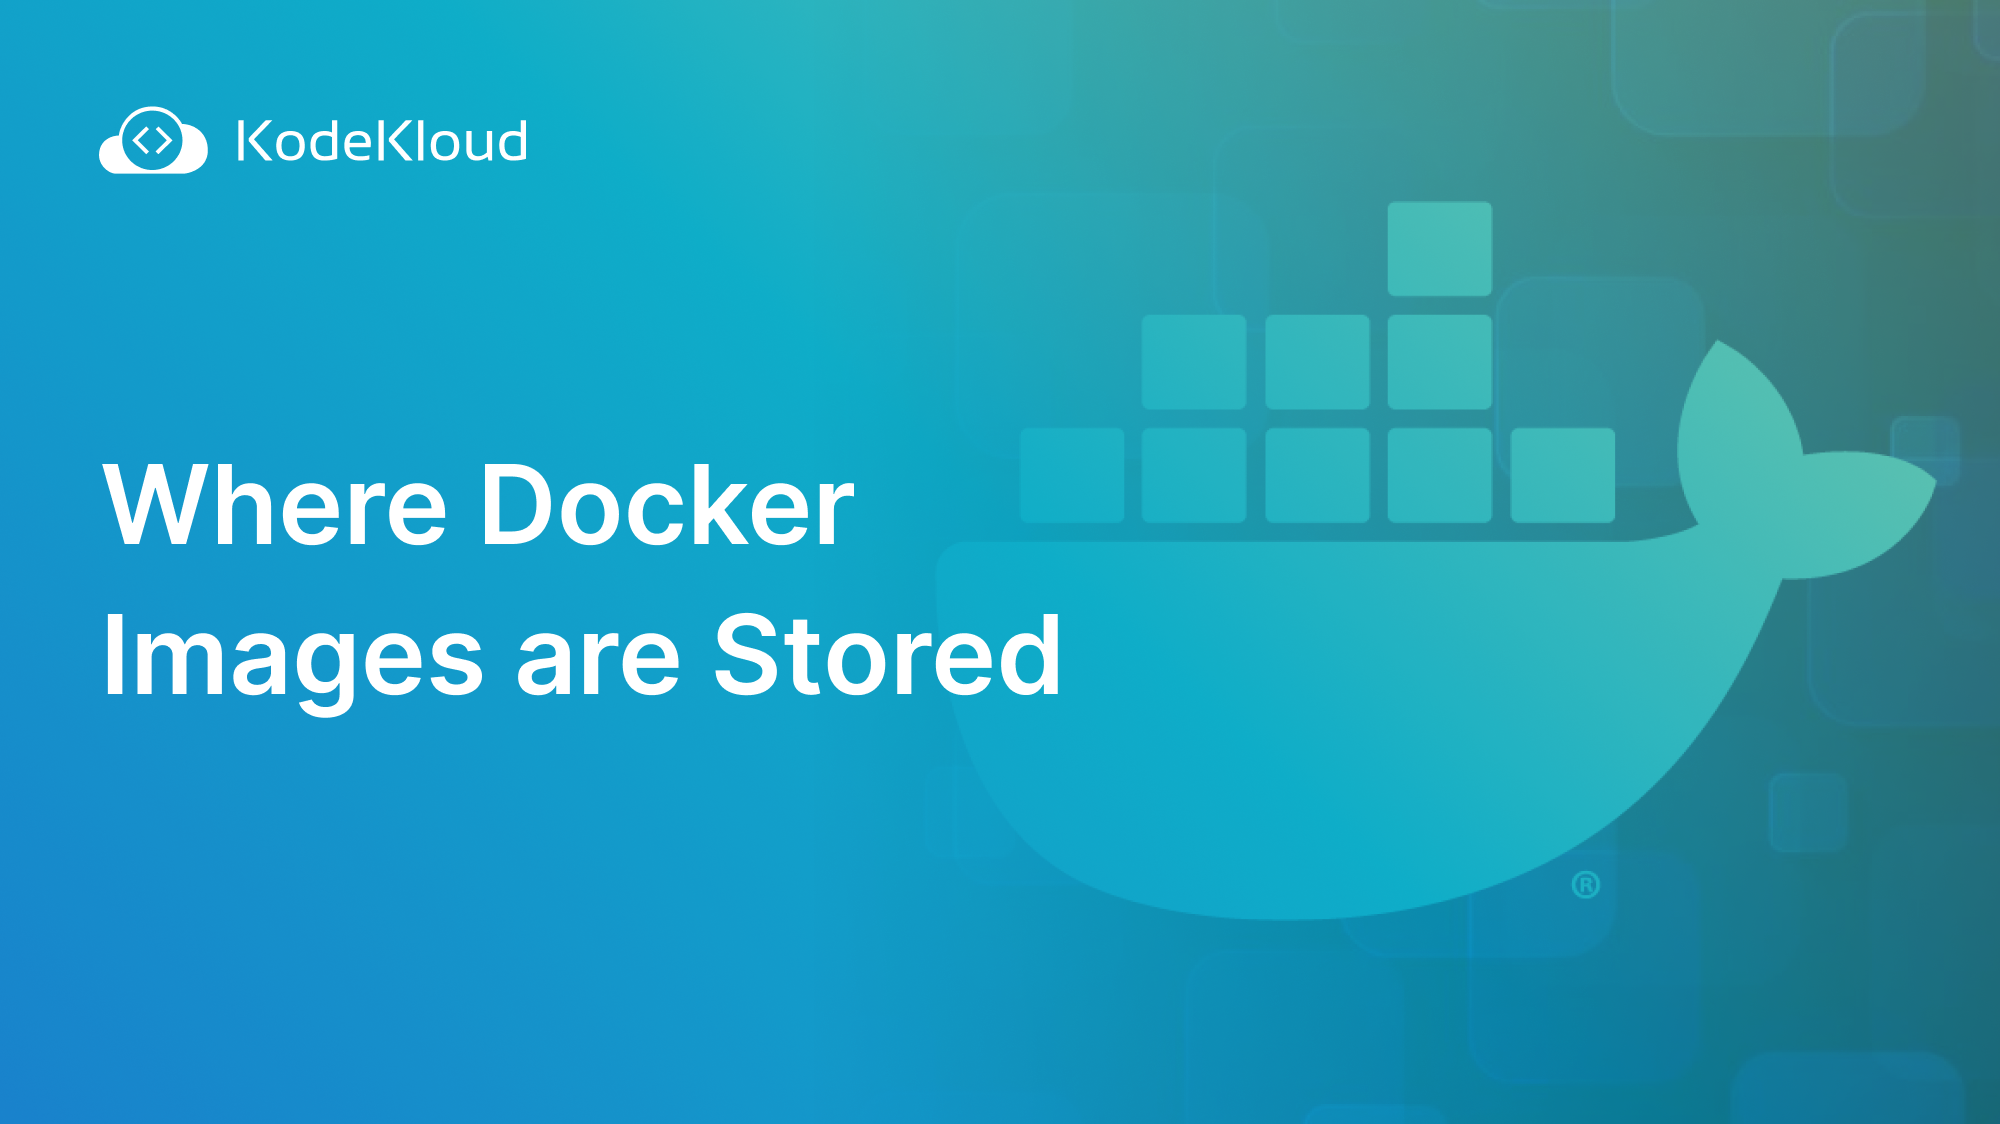 Where Docker Images are Stored